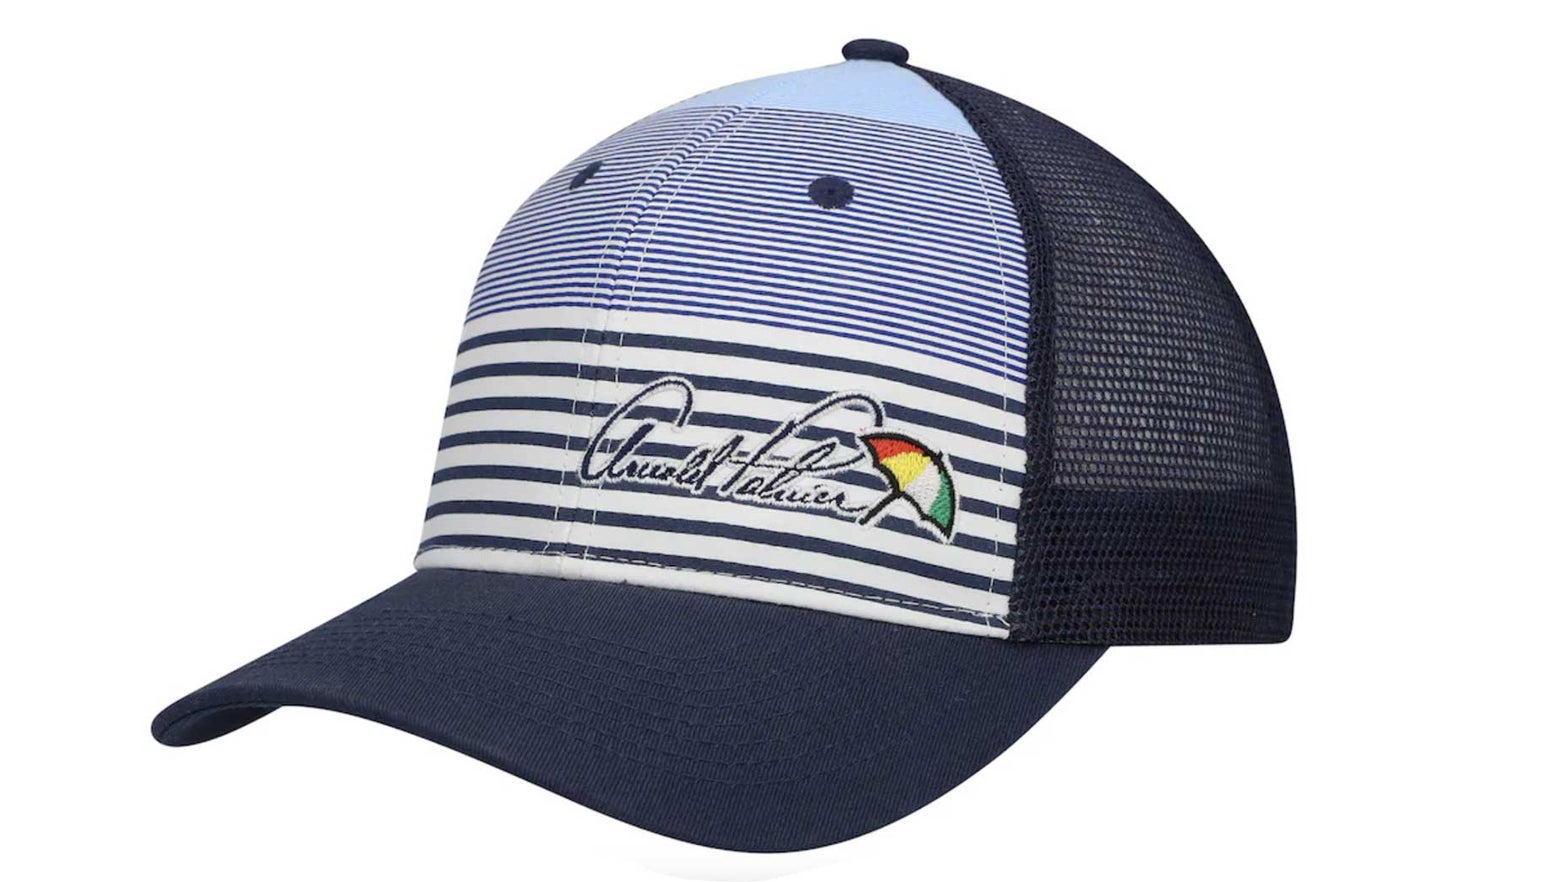 Start the Arnold Palmer Invitational by adding a new cap to your closet